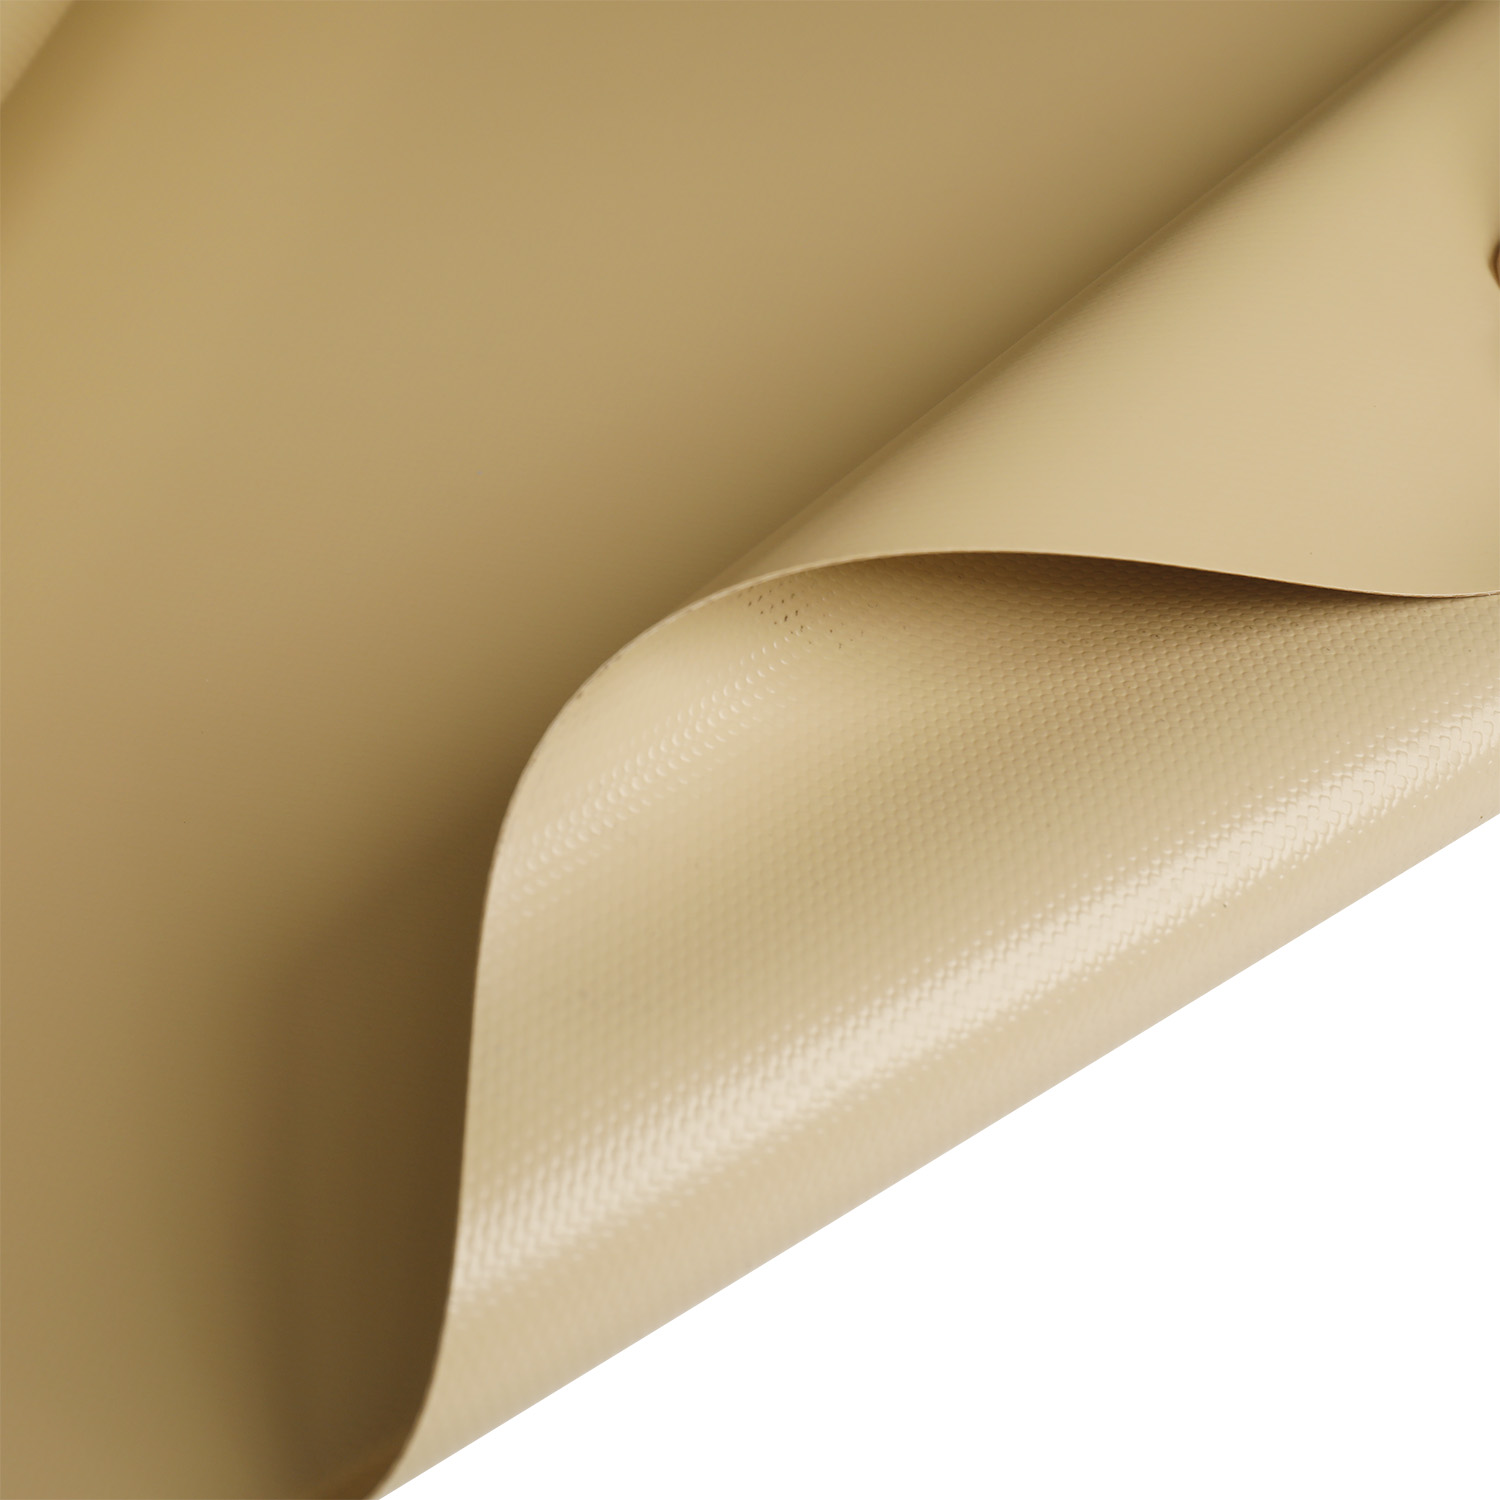 High-Quality PVC Coated Tarpaulin Rolls for Durable Tenting and Covering Solutions